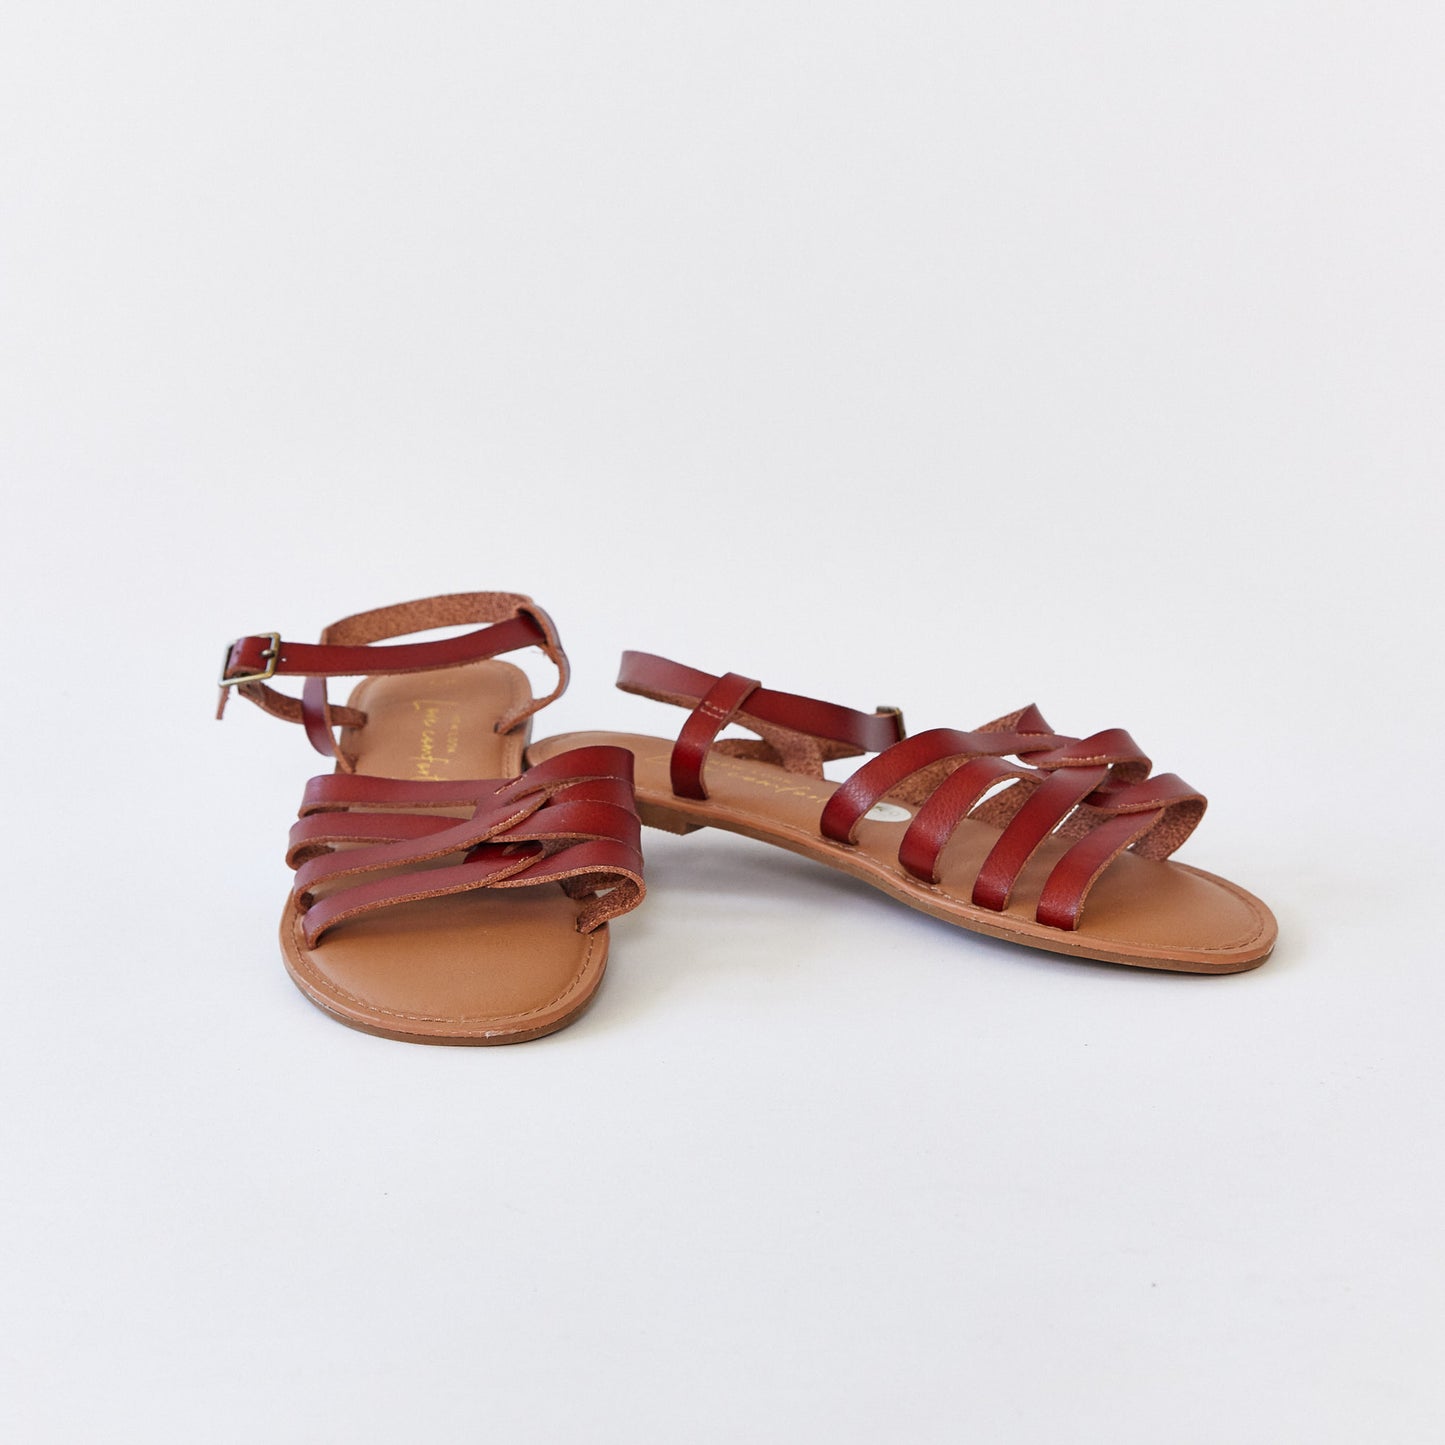 Brown leather sandal size 6